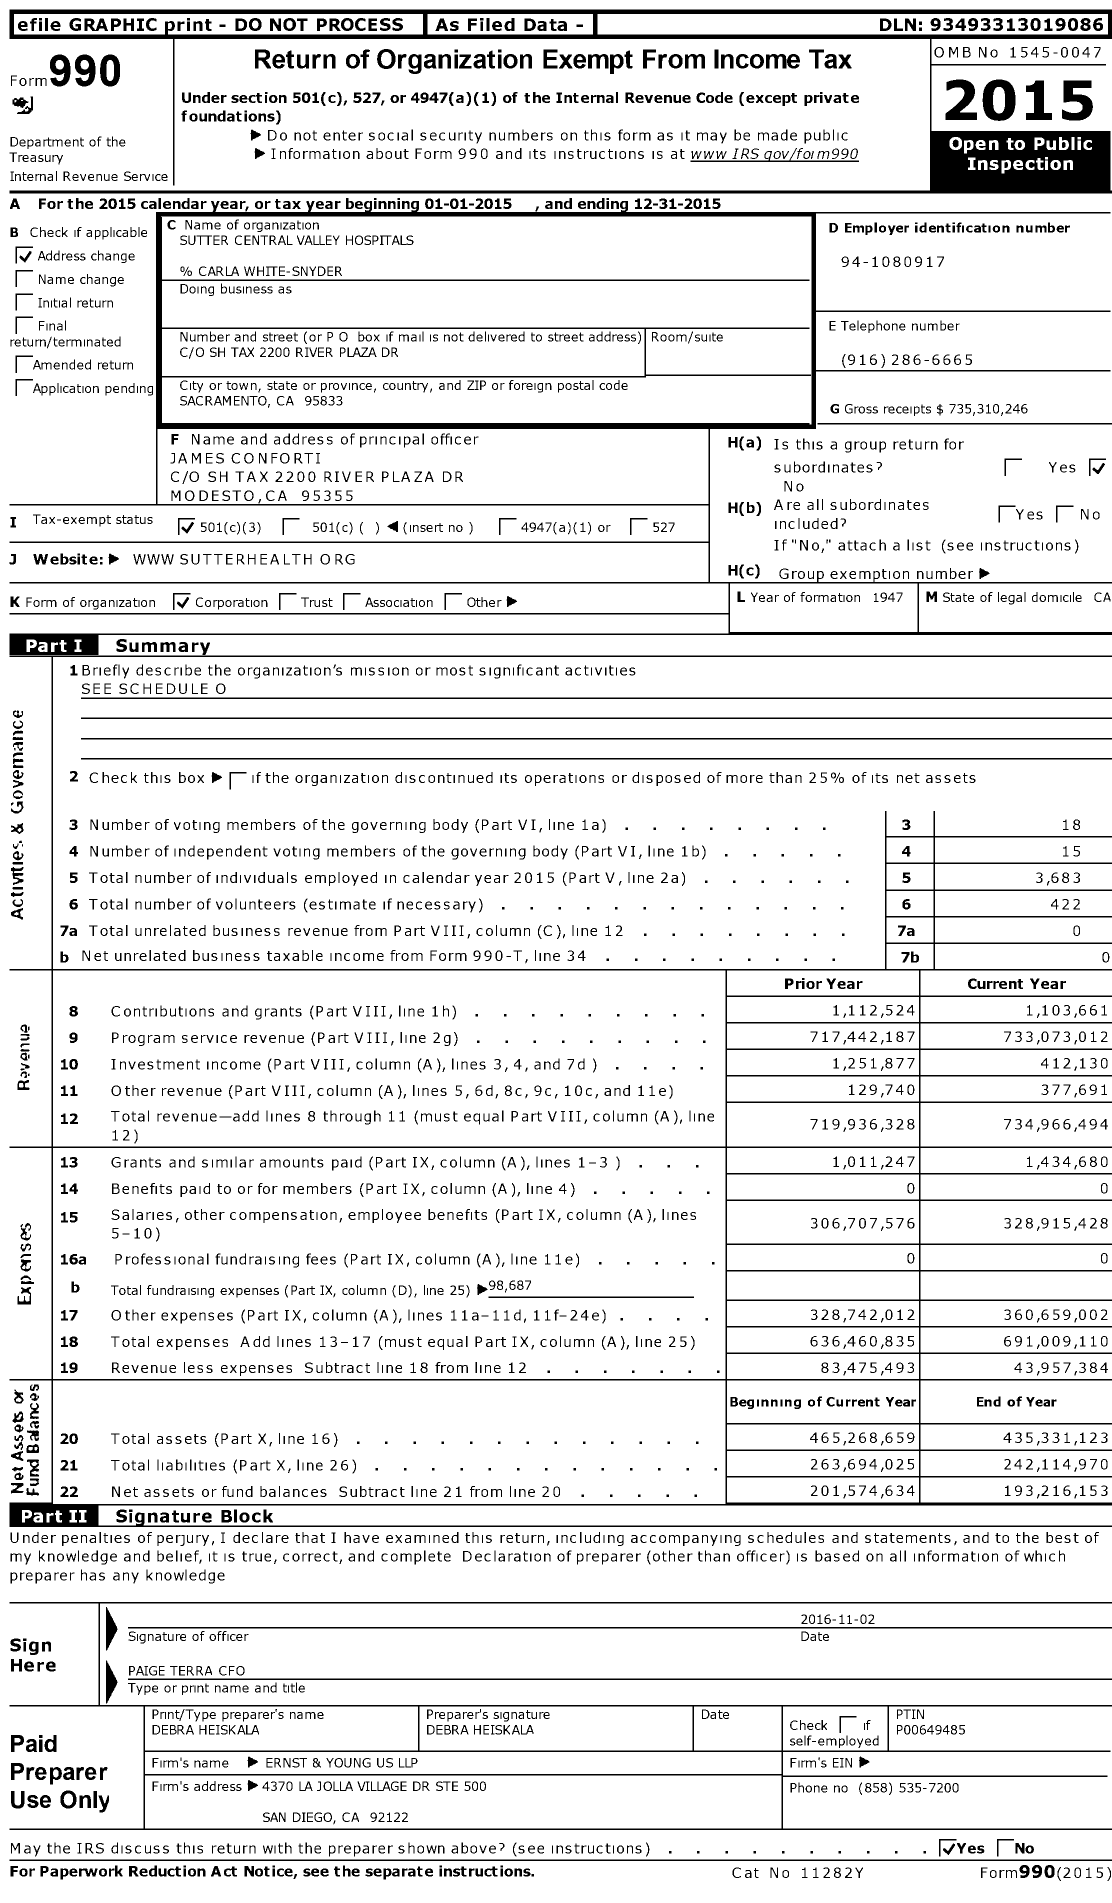 Image of first page of 2015 Form 990 for Memorial Medical Center (MMC)